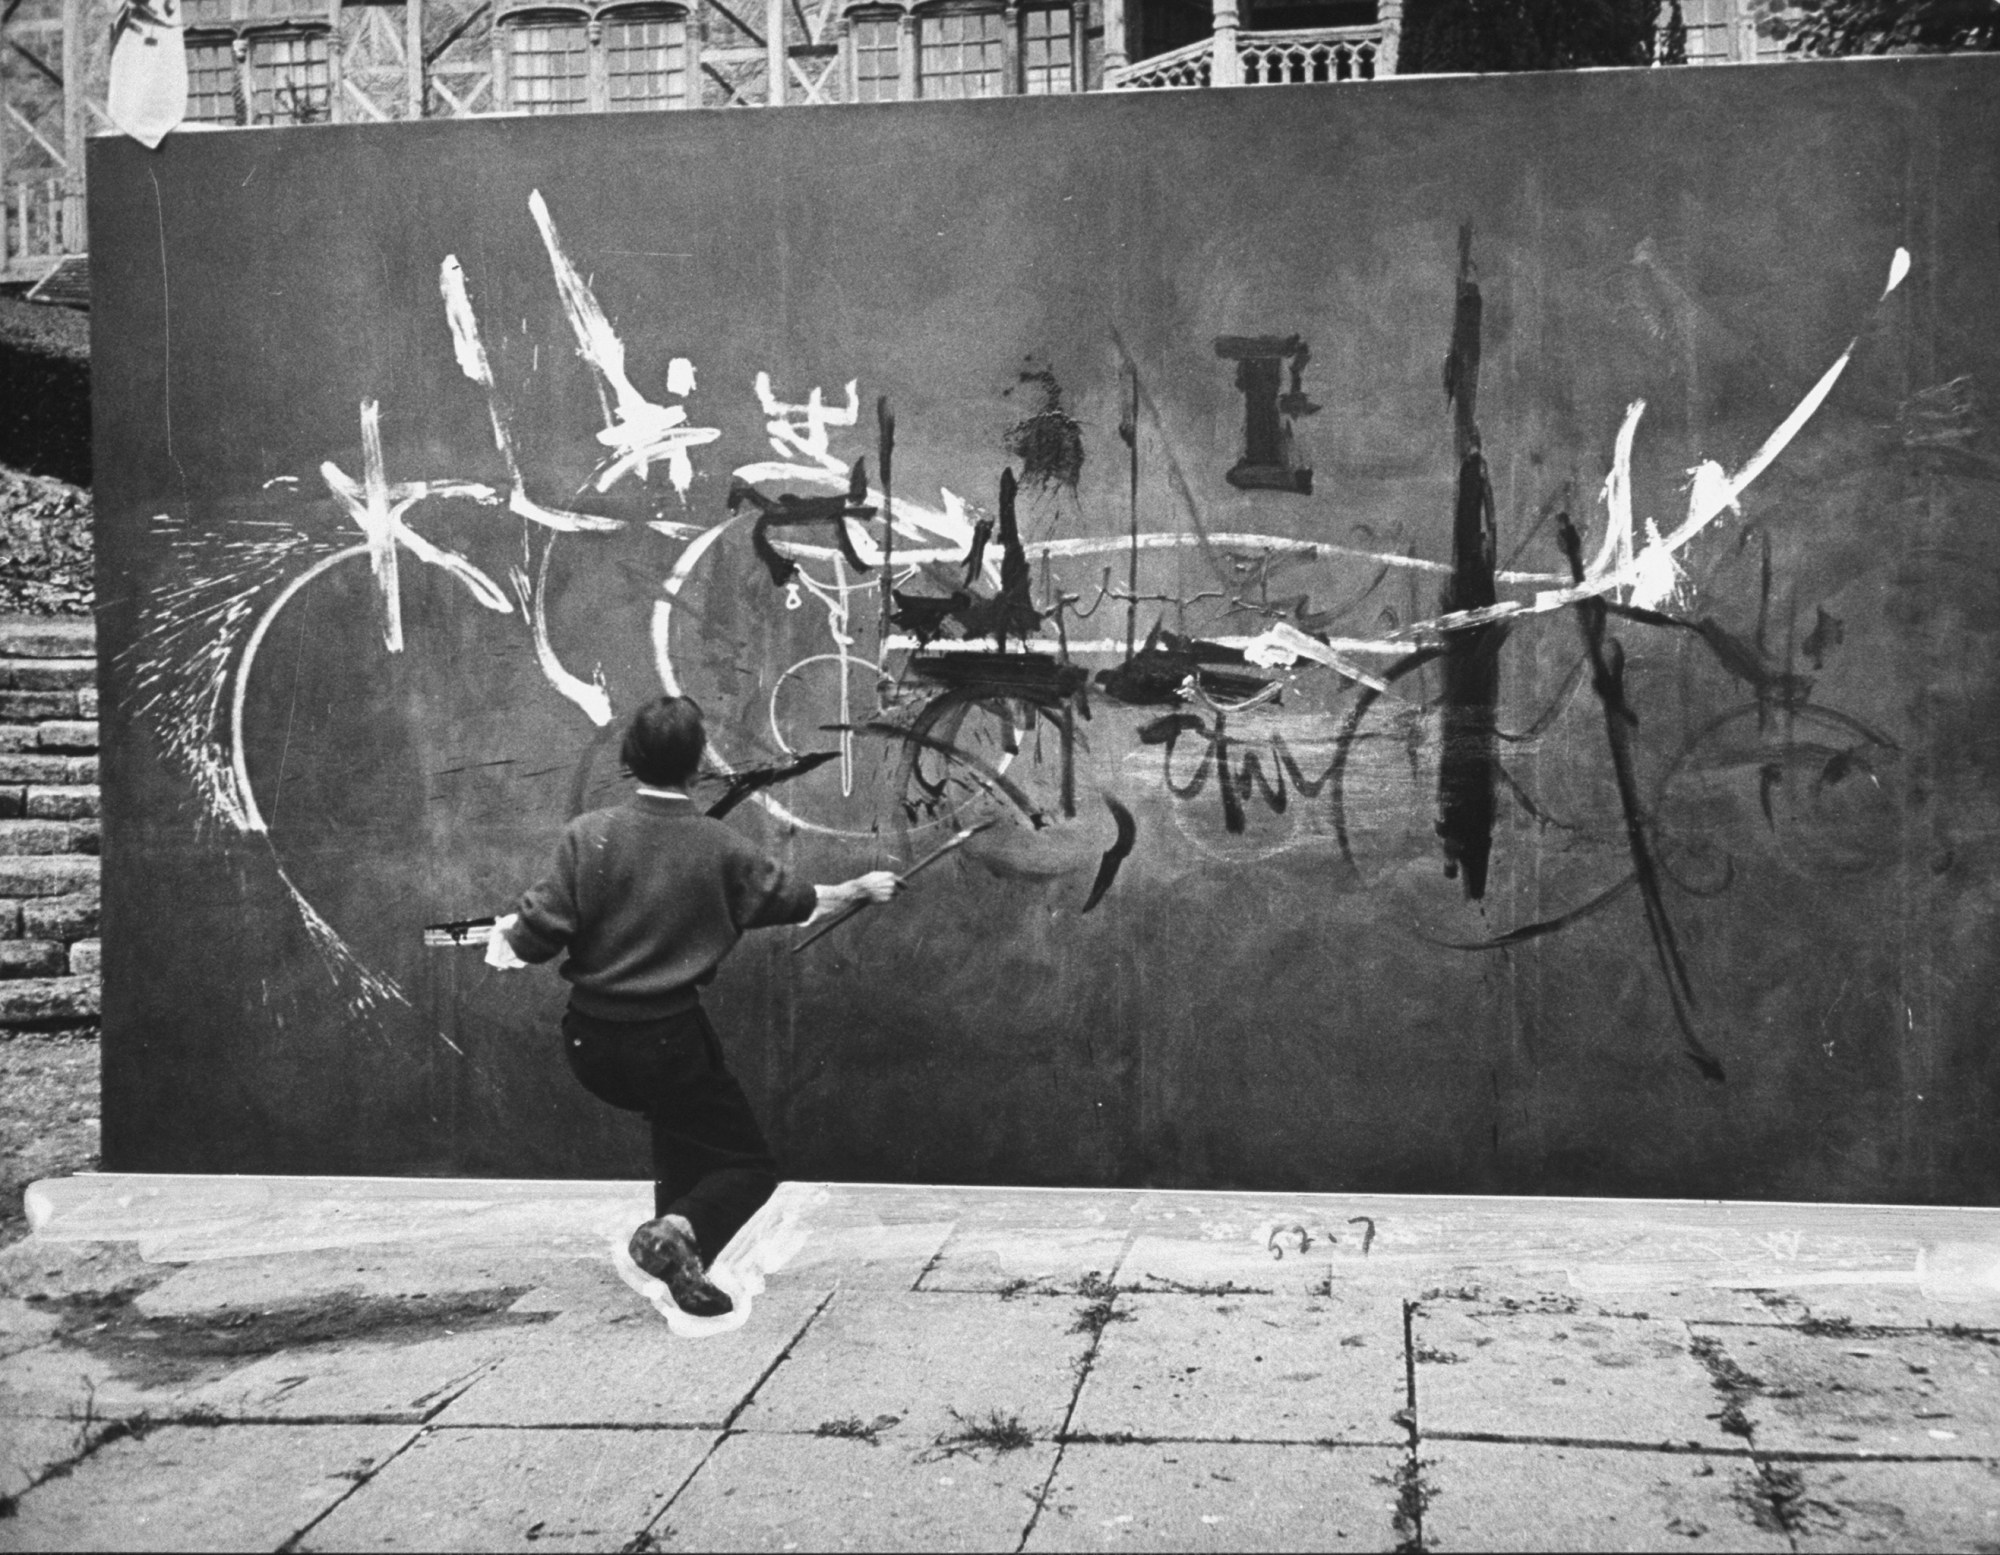 A photograph captures Georges Mathieu in the midst of painting a large abstract canvas outside while wielding long brushes.